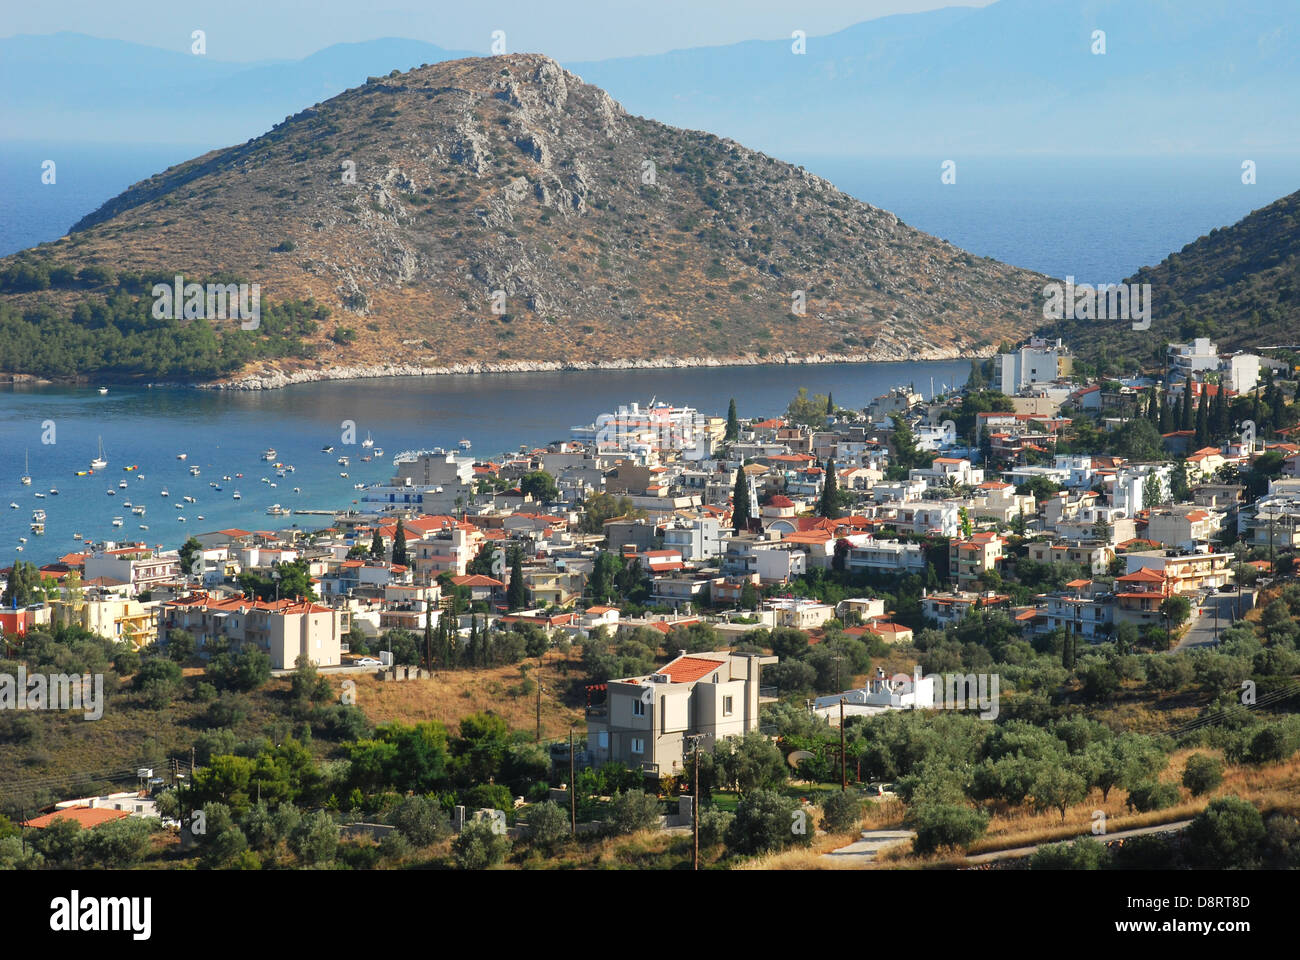 Aerial view of summer resort Tolo, Greece Stock Photo